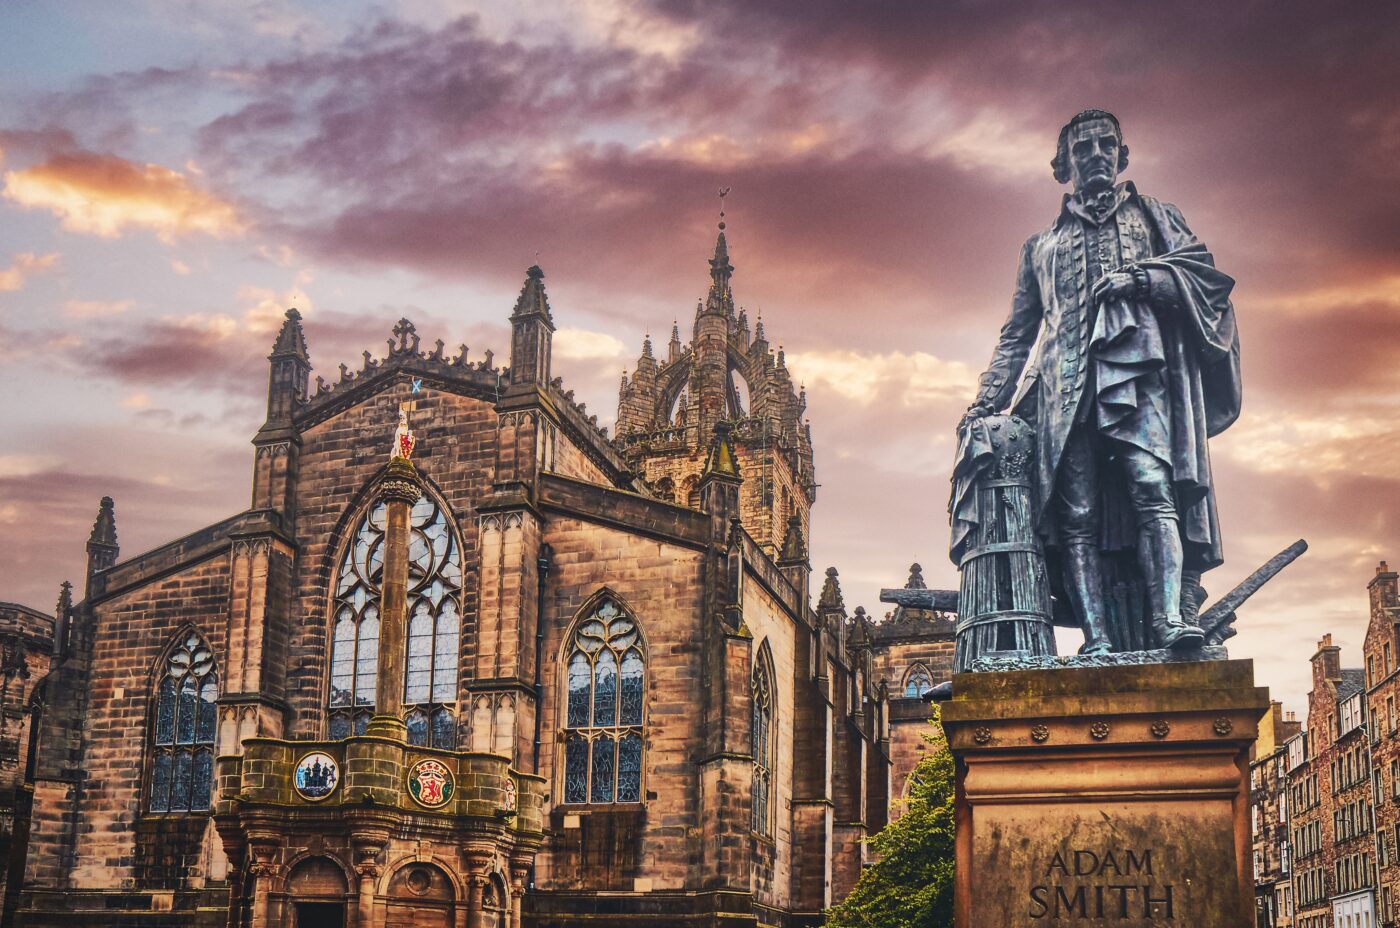 St Giles Cathedral in Edinburgh at sunset, featuring the statue of Adam Smith,